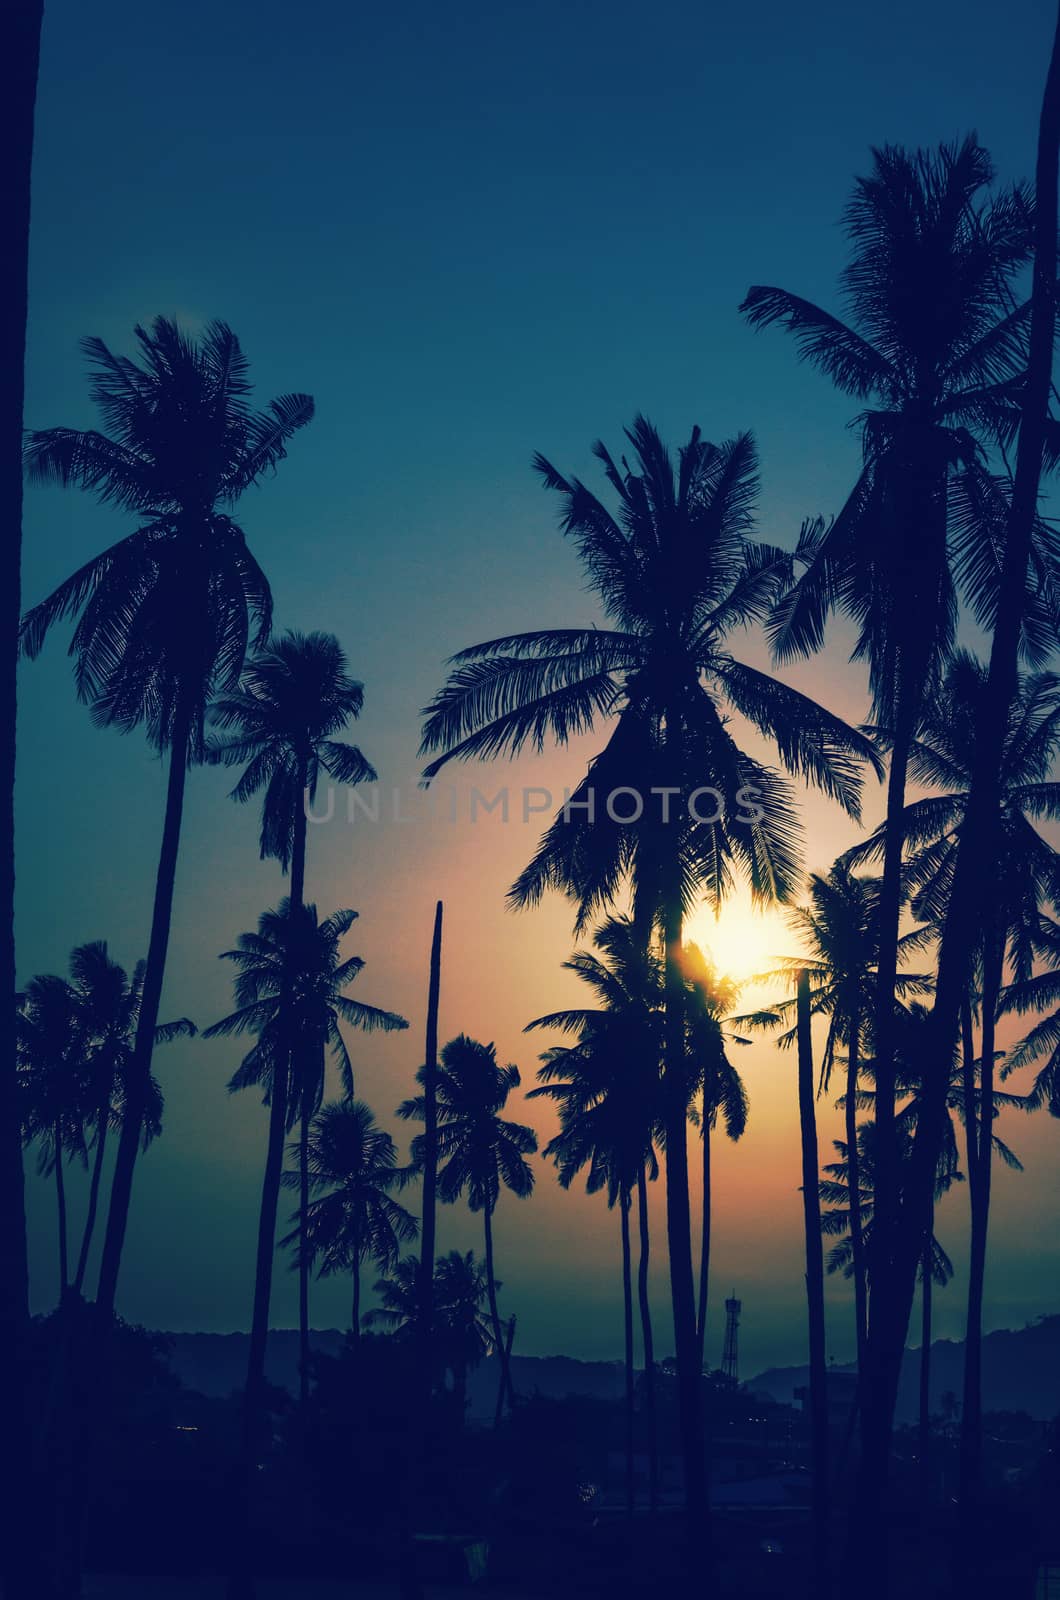 Coconut palms Vintage by aoo3771